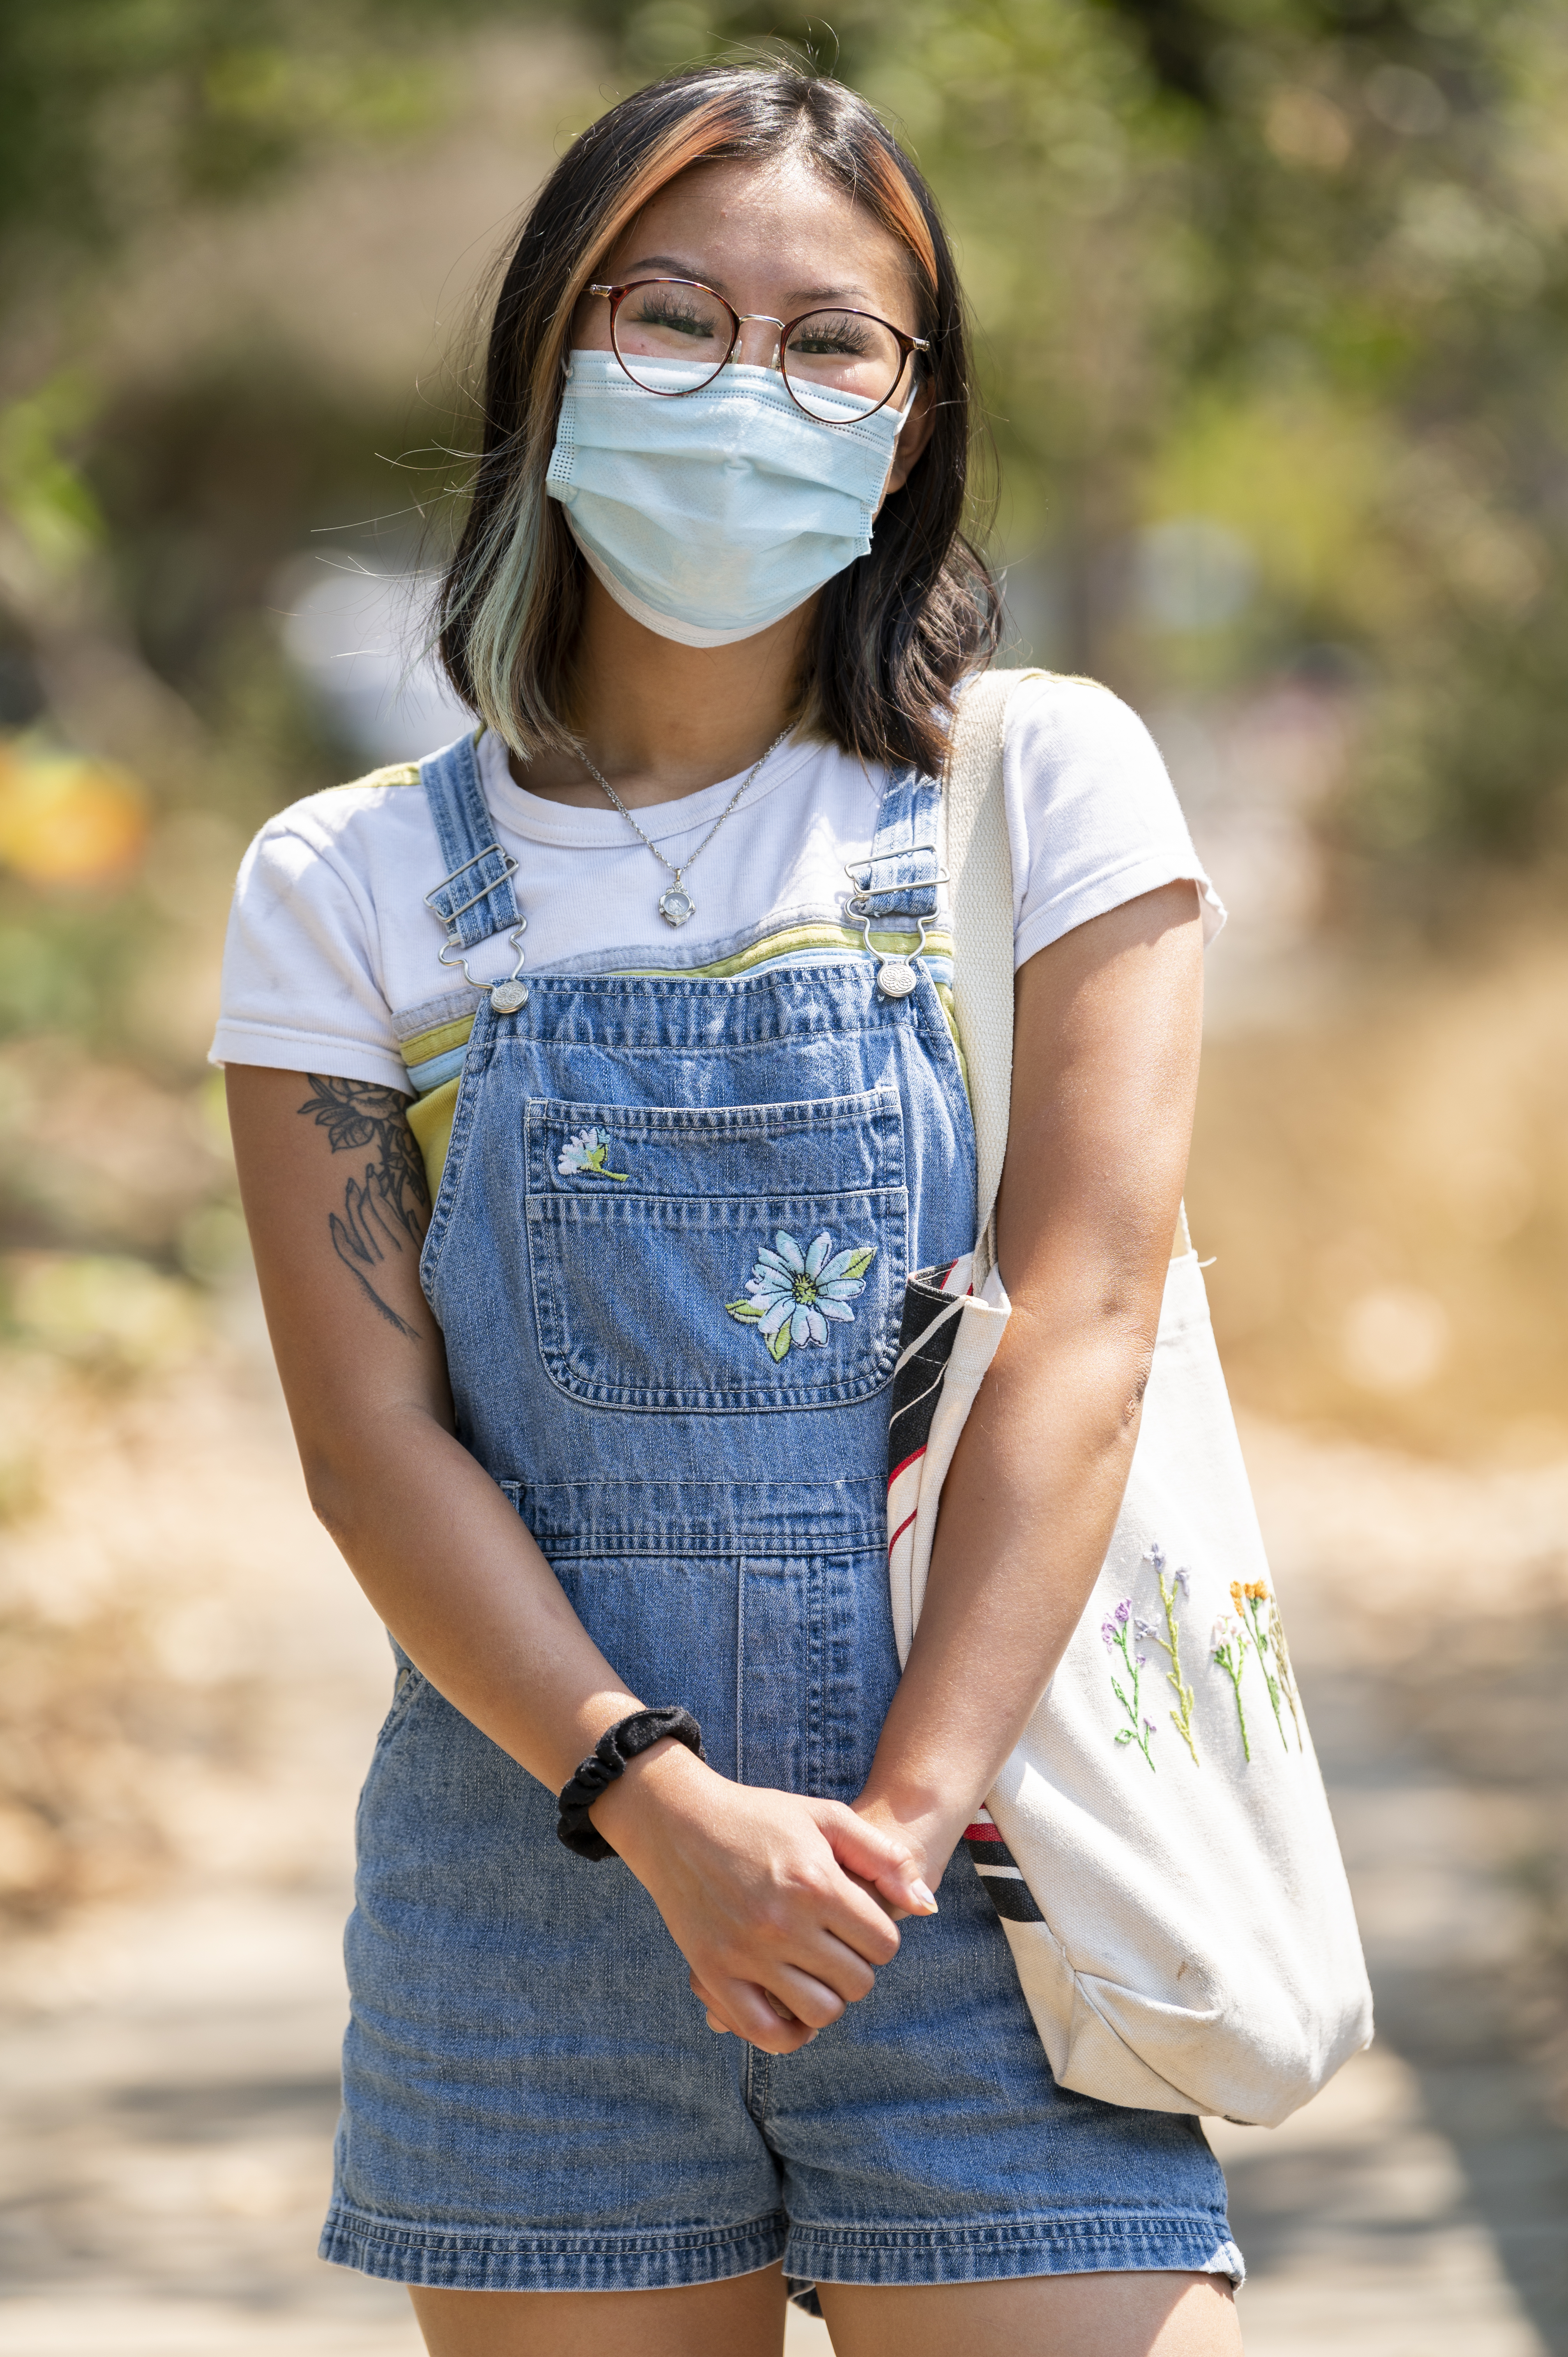 Image of a UCSB student learning a face covering